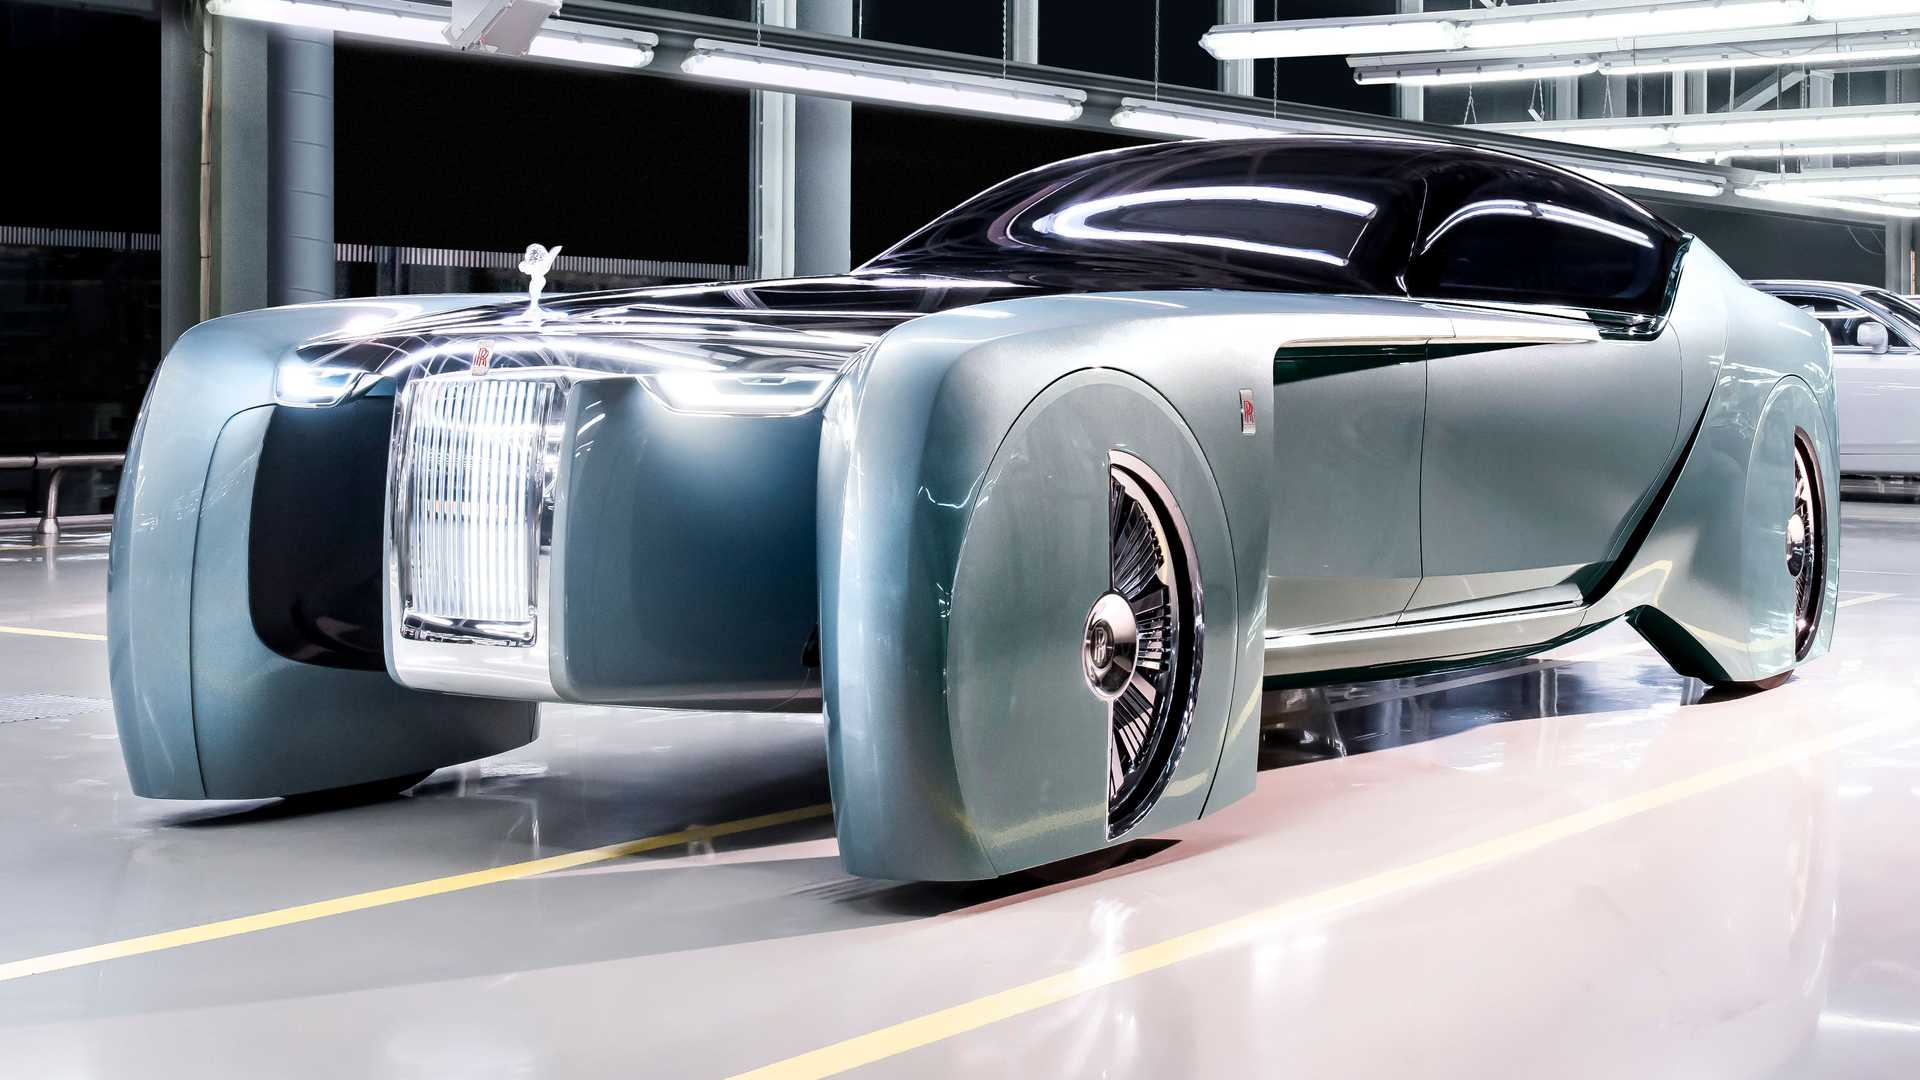 Allelectric Rolls Royce is companys vision for next 100 years